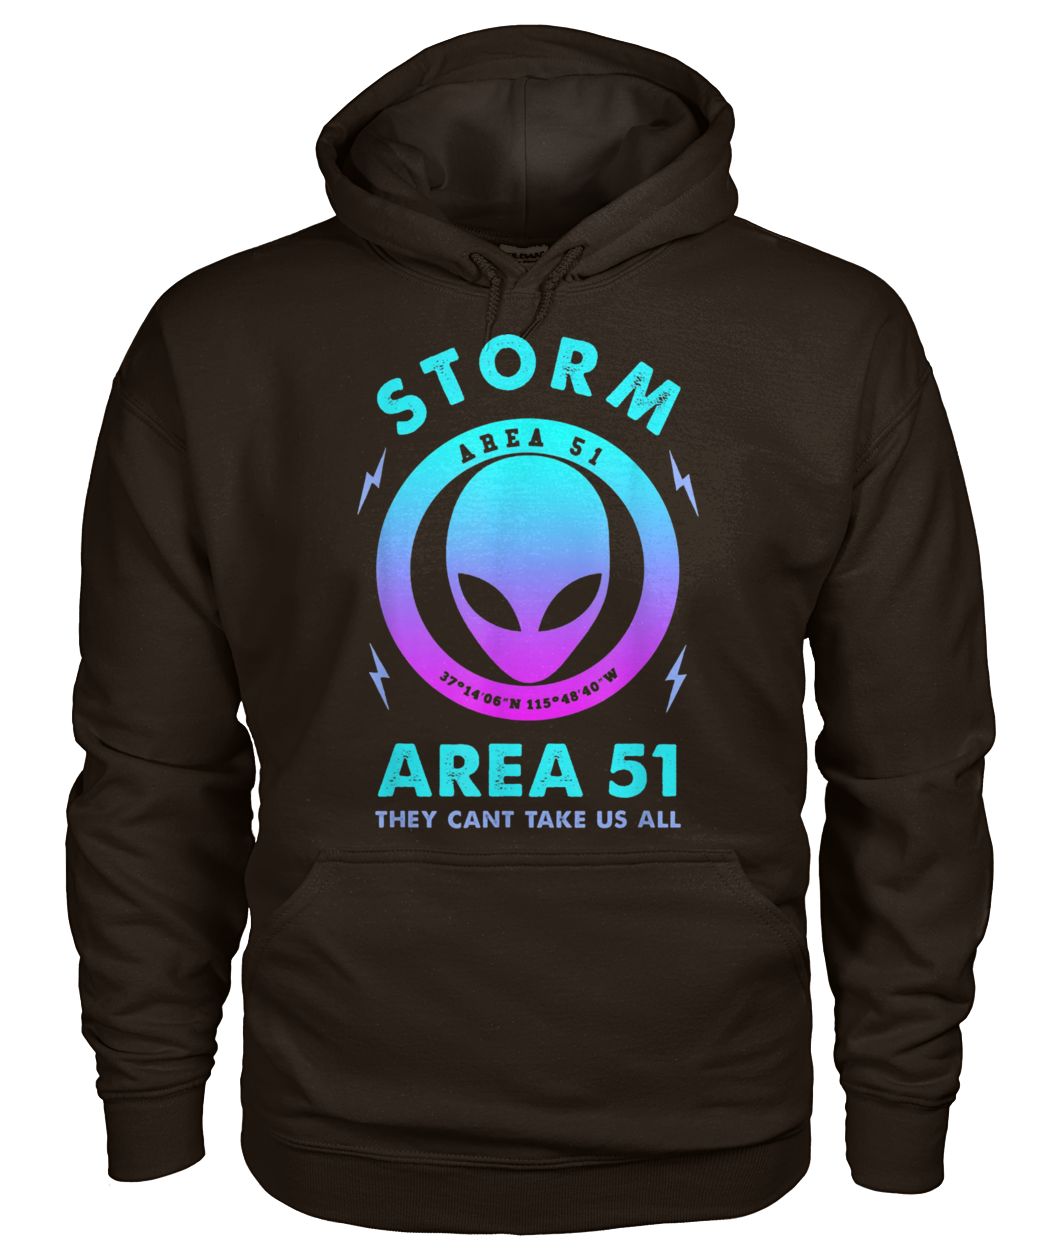 Storm area 51 alien they can't stop all us gildan hoodie